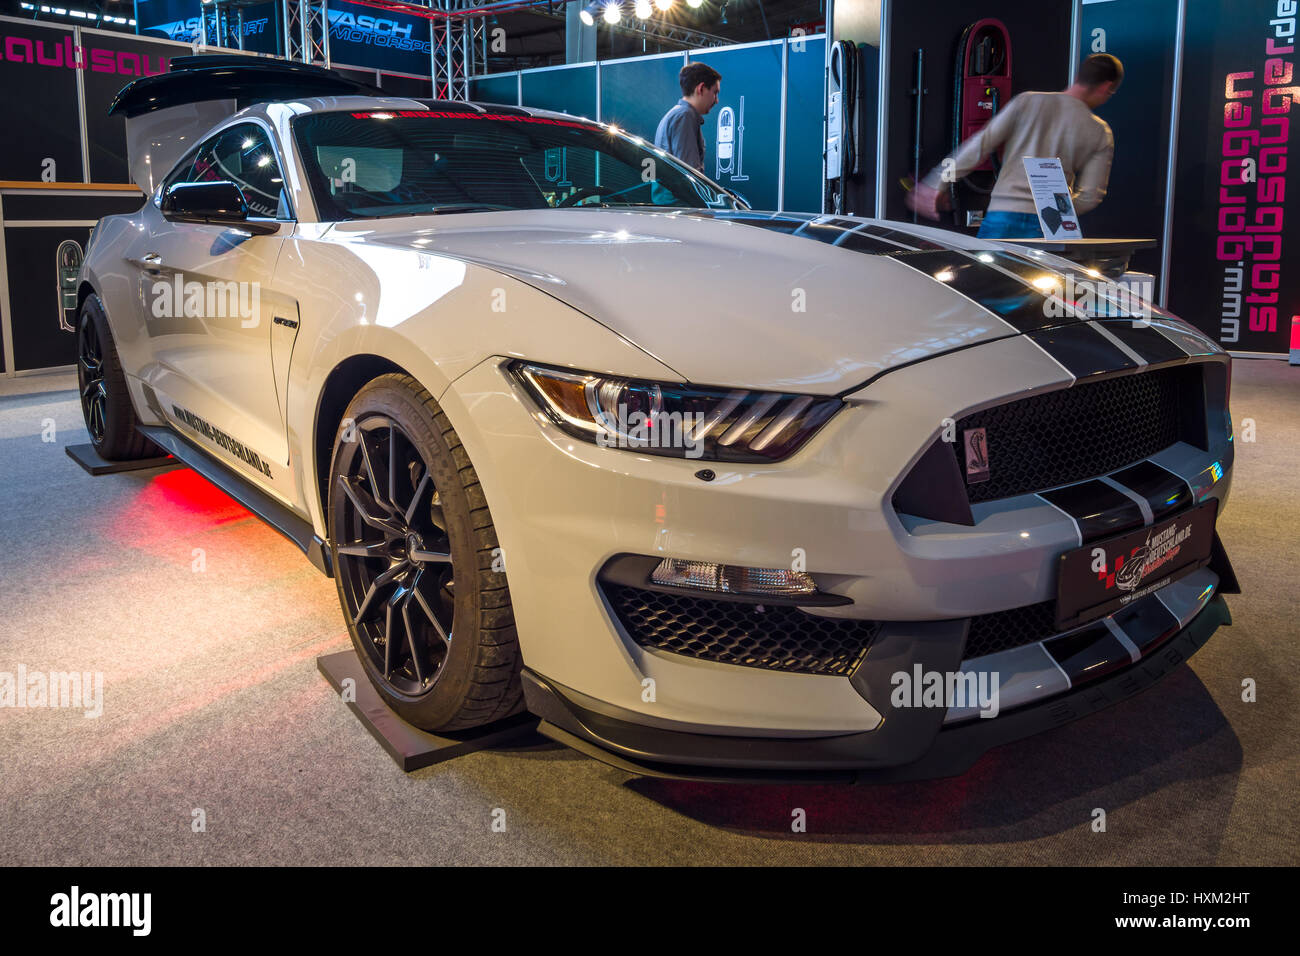 STUTTGART, GERMANY - MARCH 02, 2017: Muscle car Ford ...